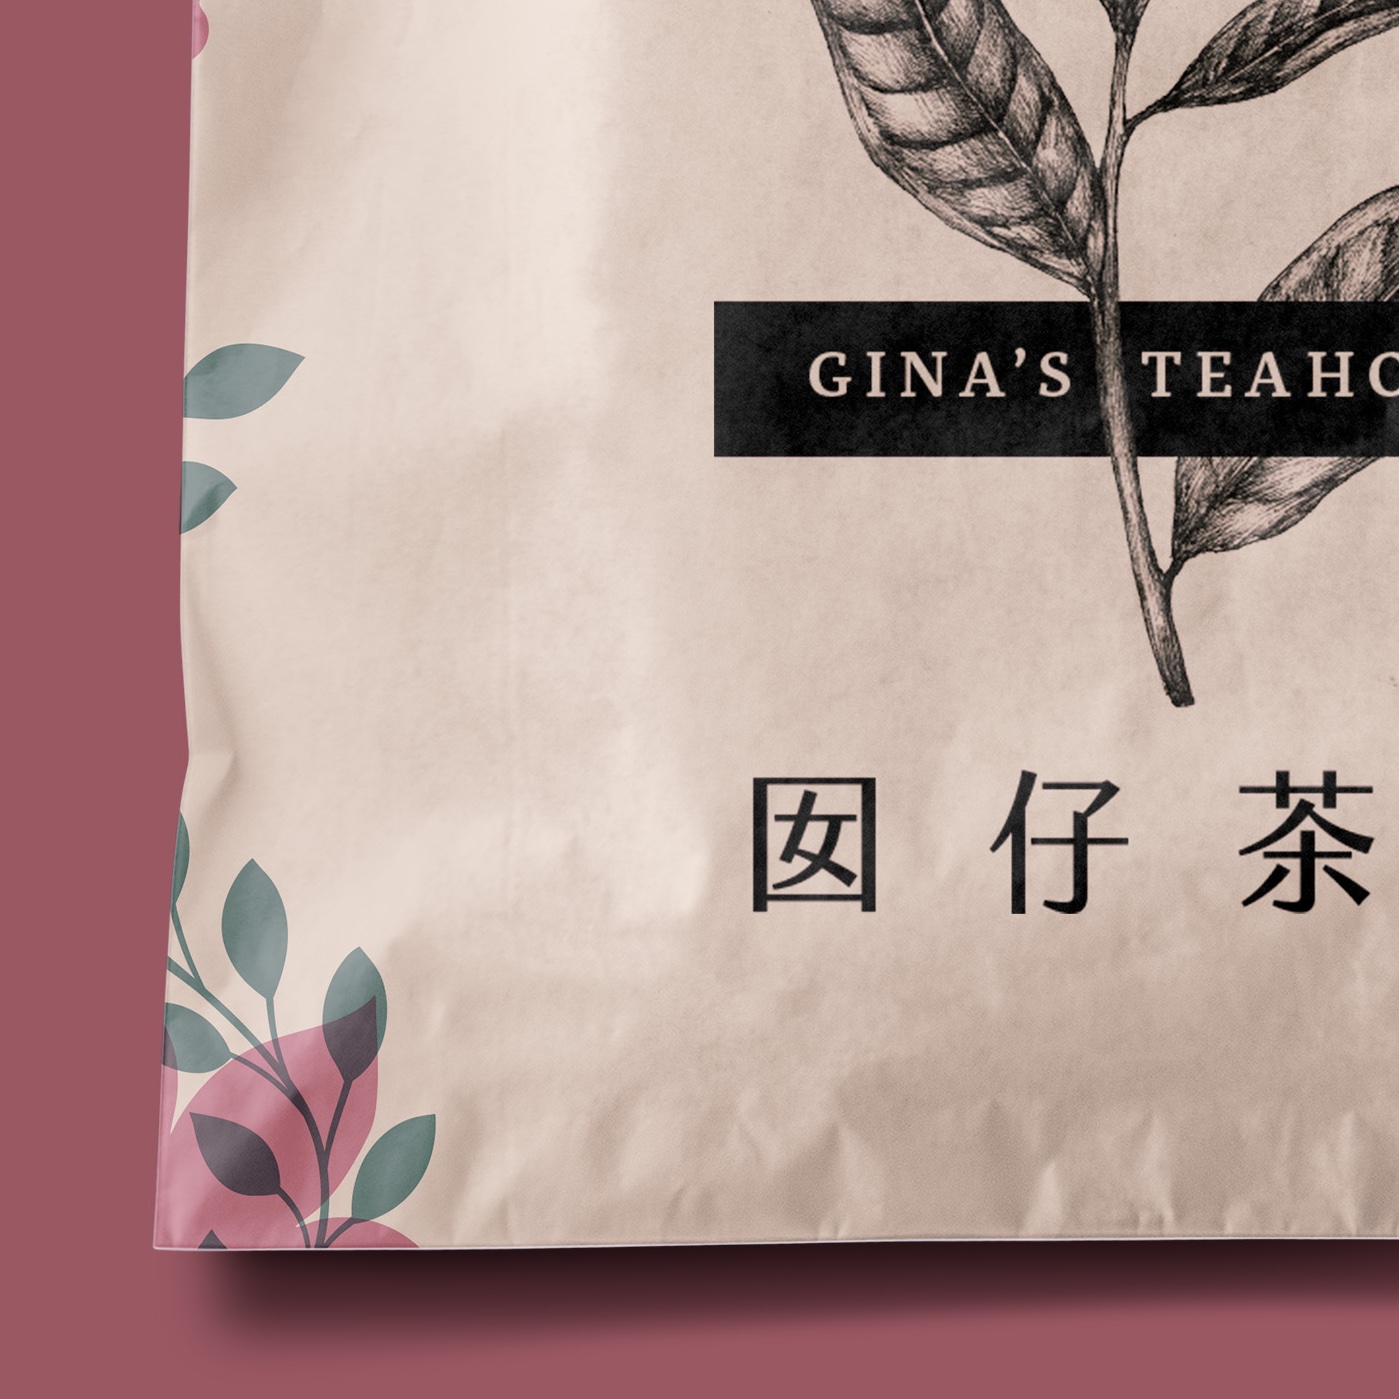 A mockup image of a light brown paper wrapping bag, such as for a cookie or pastry. On it is printed a logo reading 'Gina's Teahouse'.